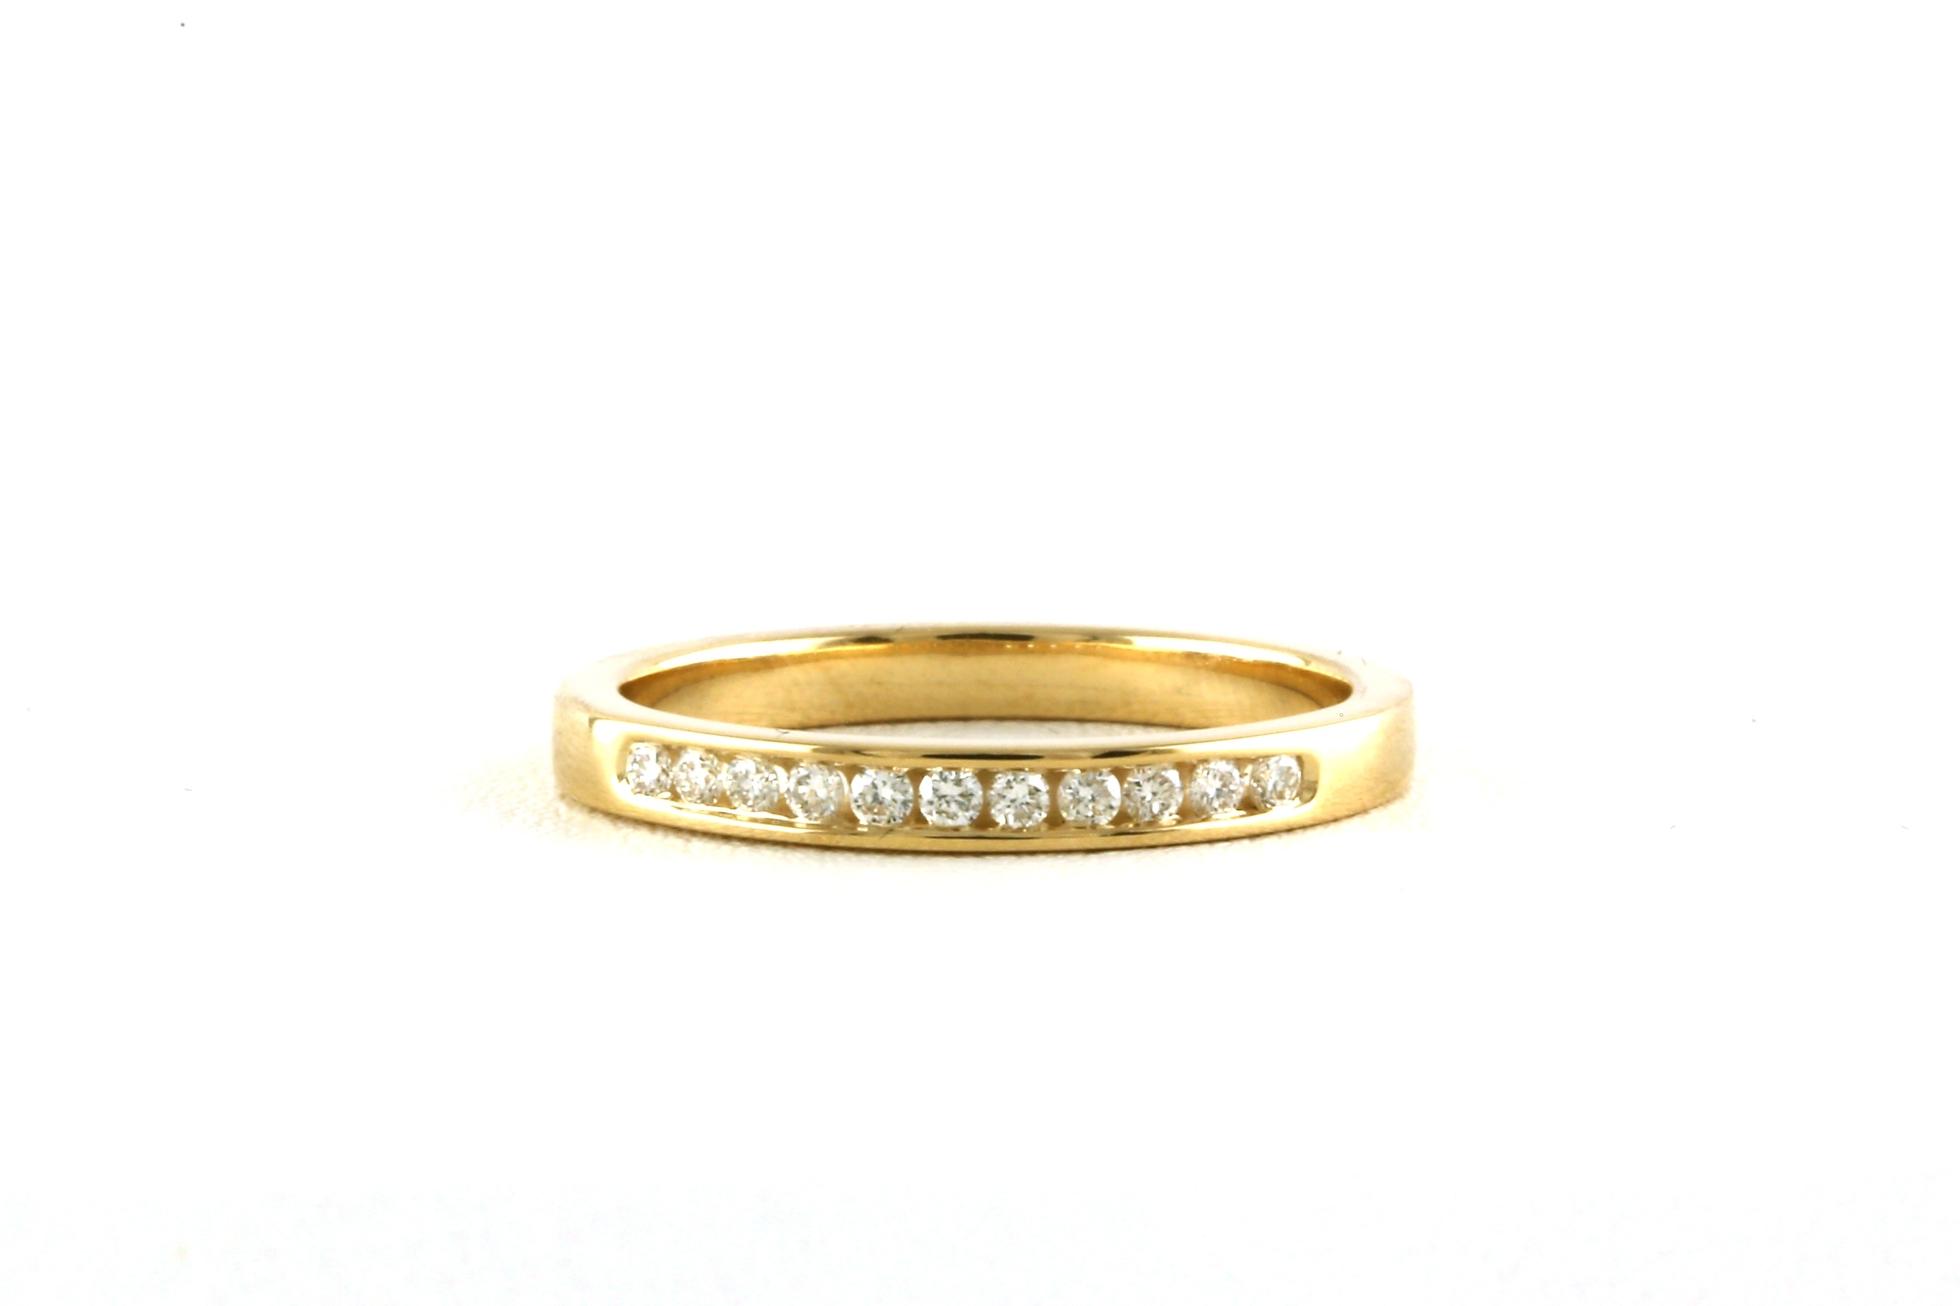 11-Stone Channel-set Diamond Wedding Band in Yellow Gold (0.14cts TWT)